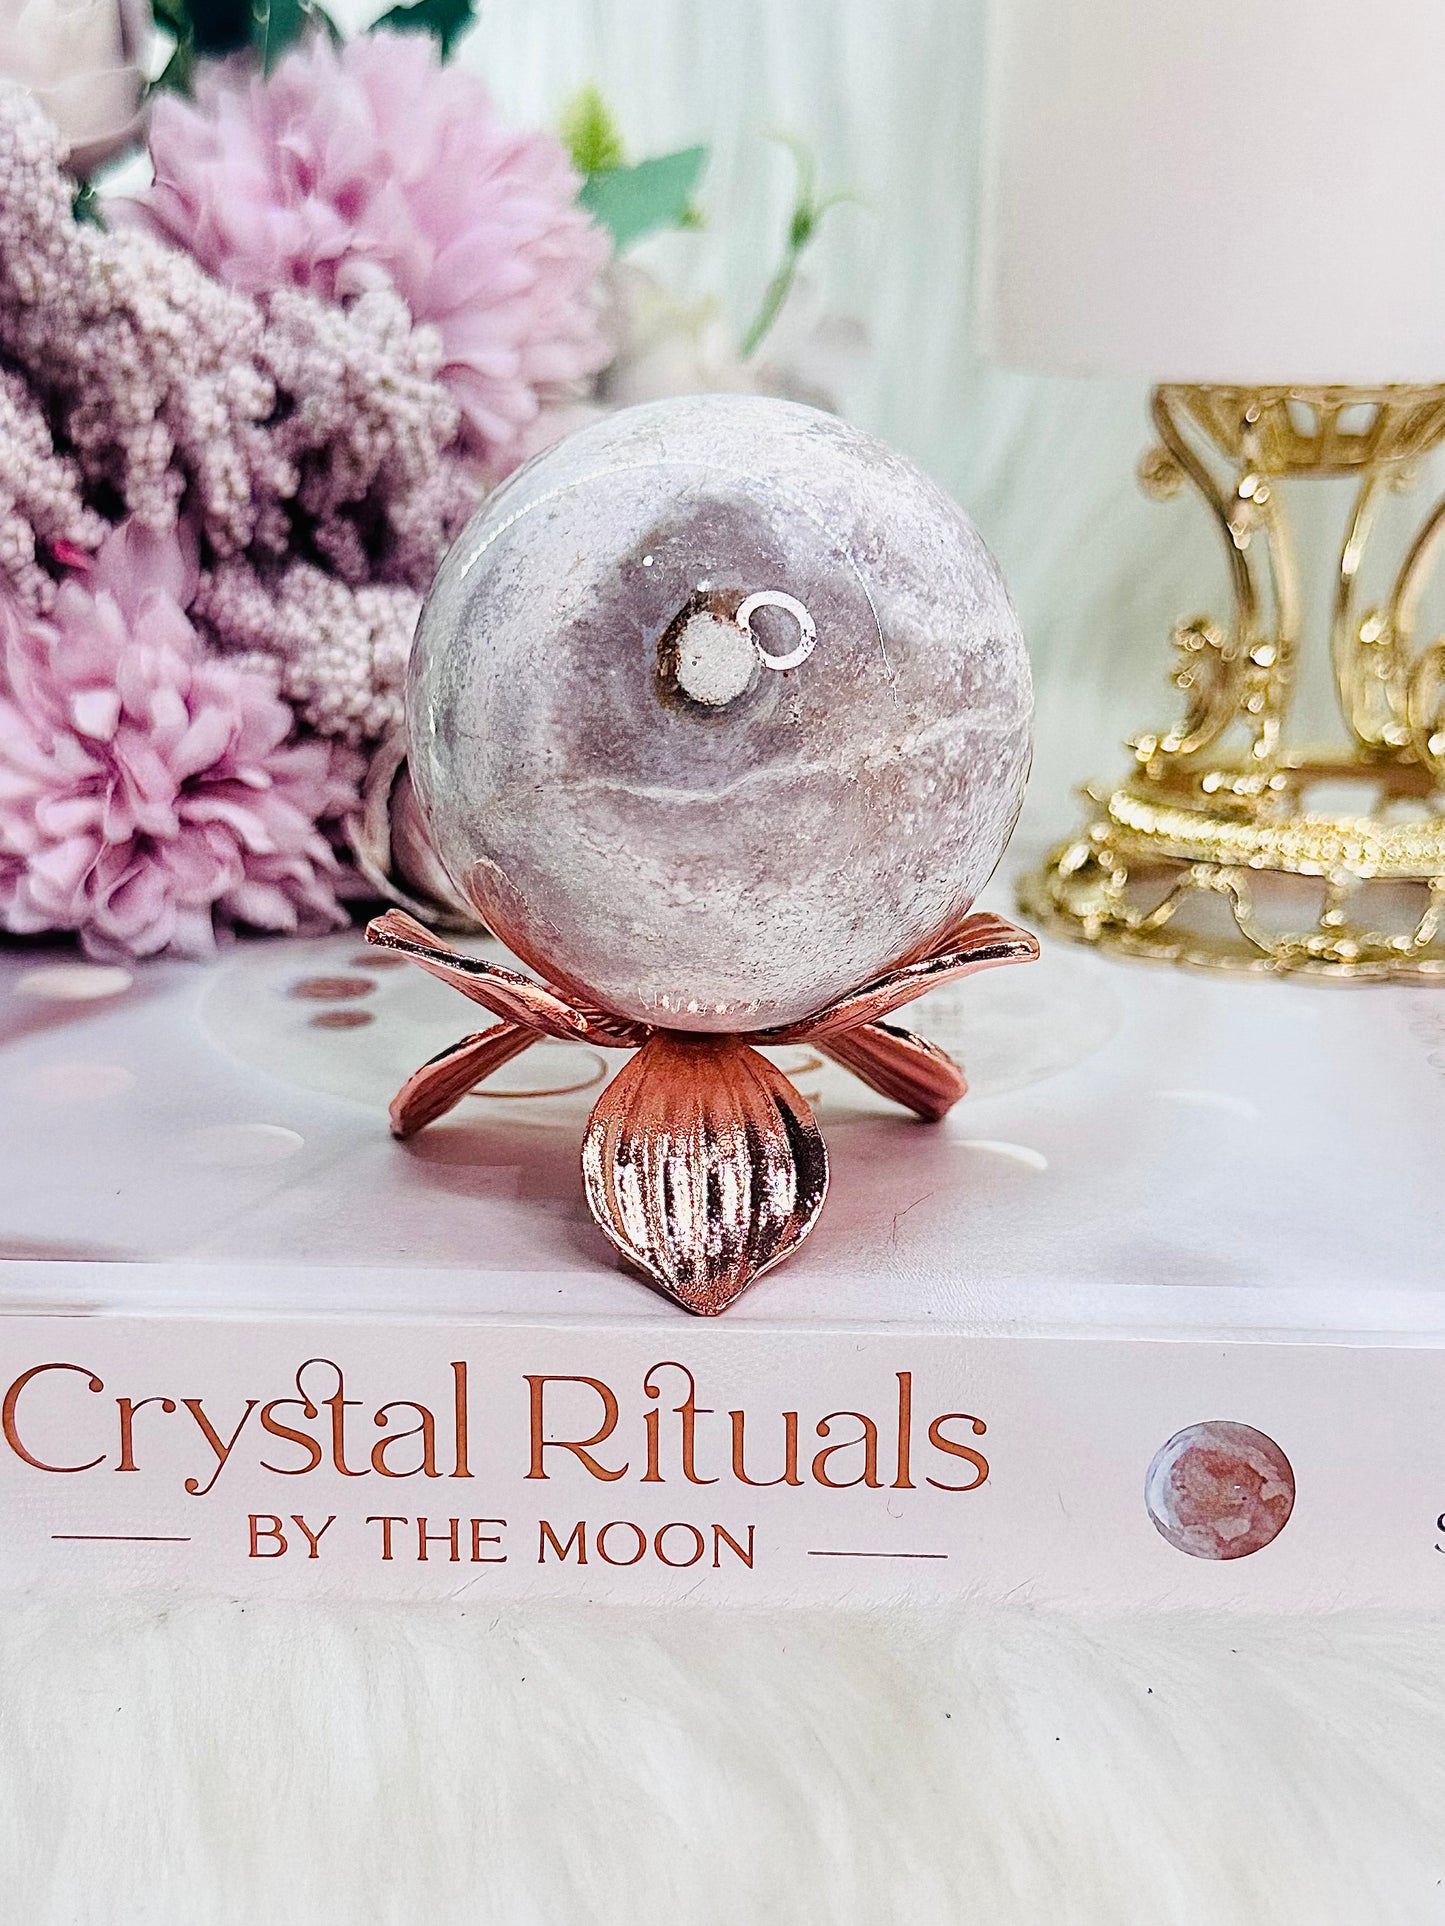 Absolutely Gorgeous Pink Amethyst Sphere On Rose Gold Flower Stand 221grams